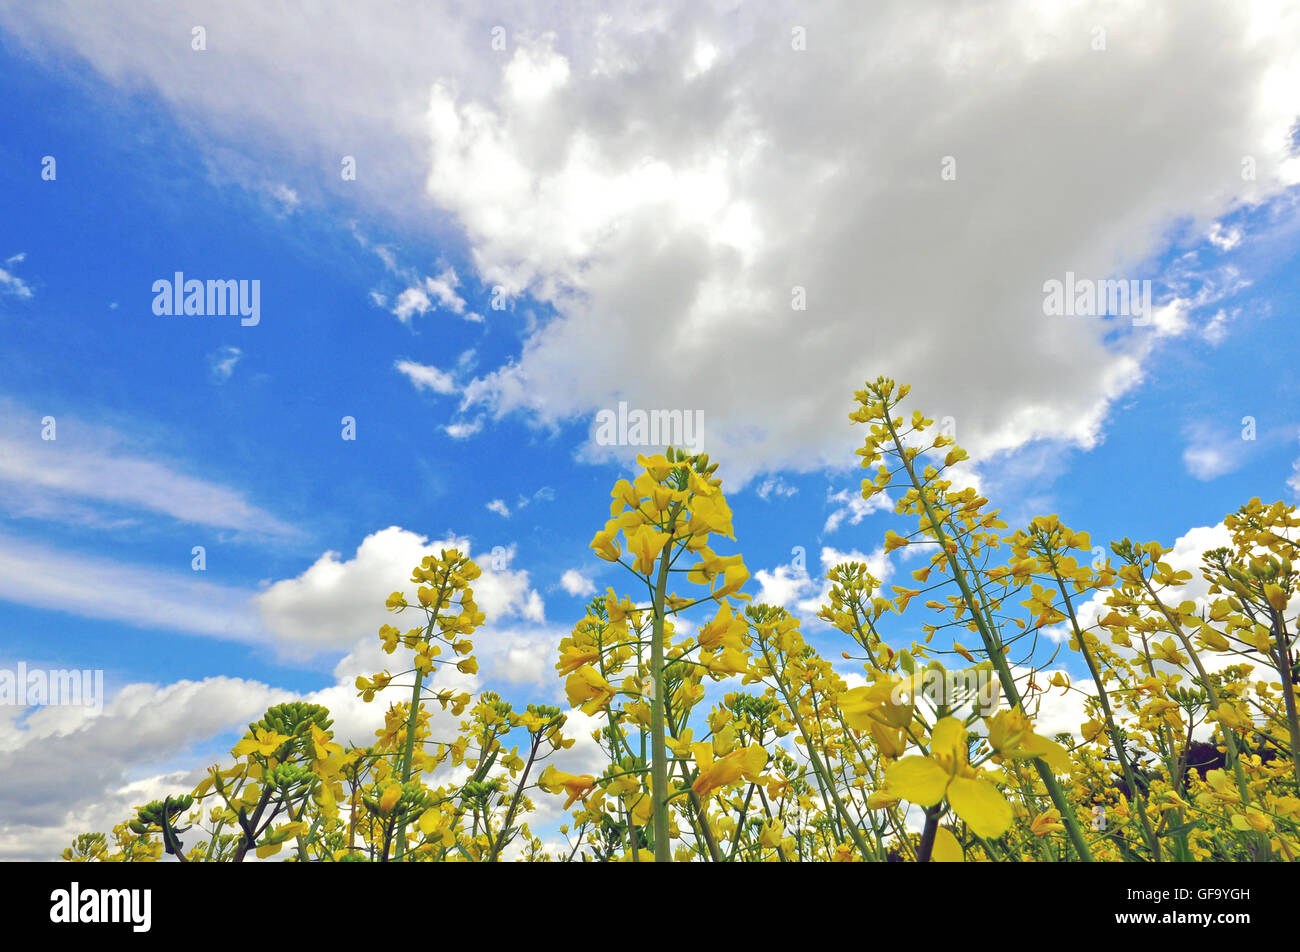 Flowers and sky, nature background Stock Photo